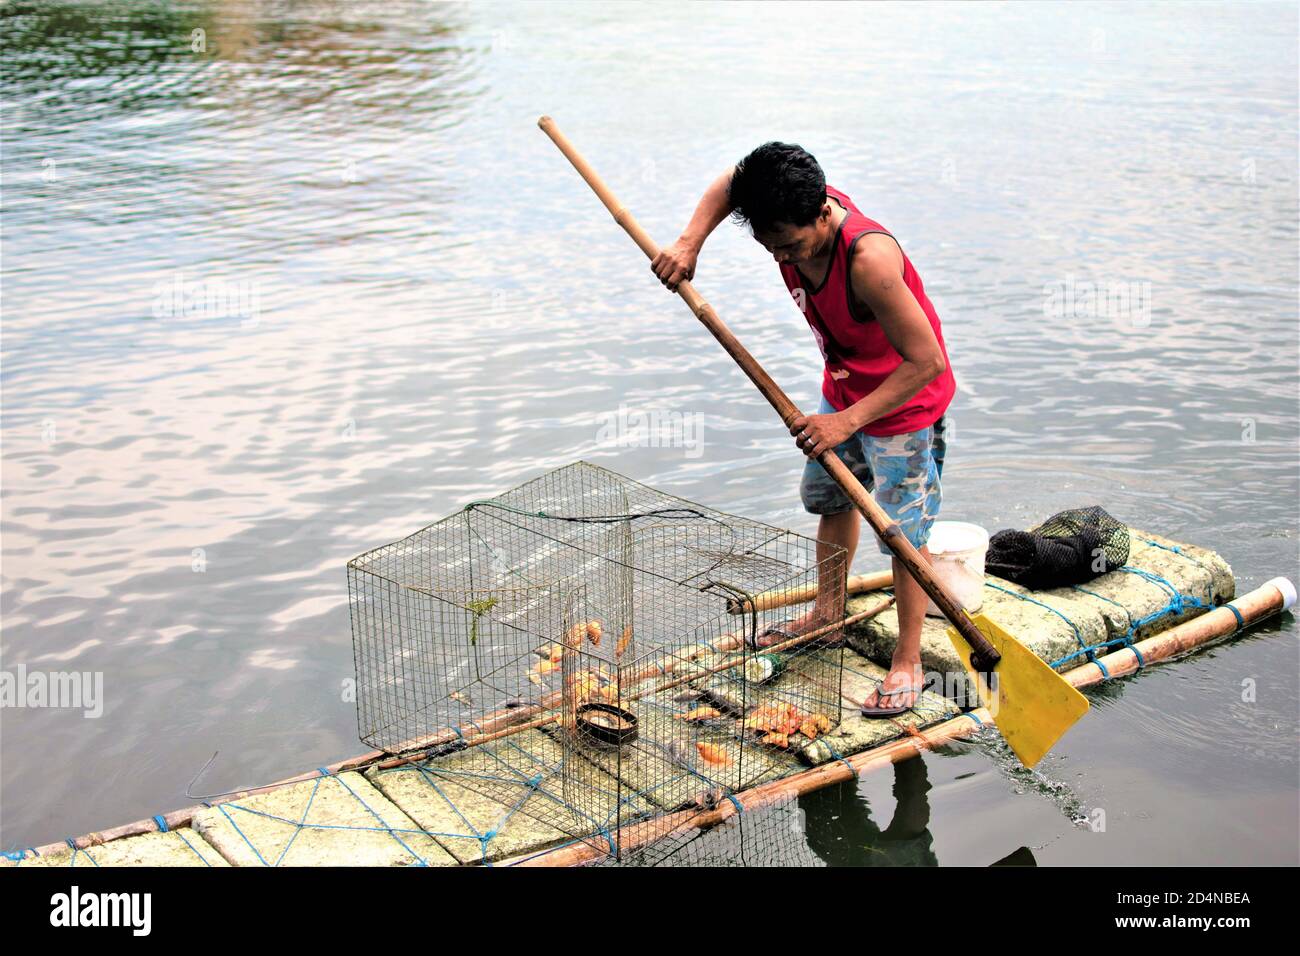 A man catches fish in a lake using a makeshift boat made of plastic foam and bamboo poles Stock Photo